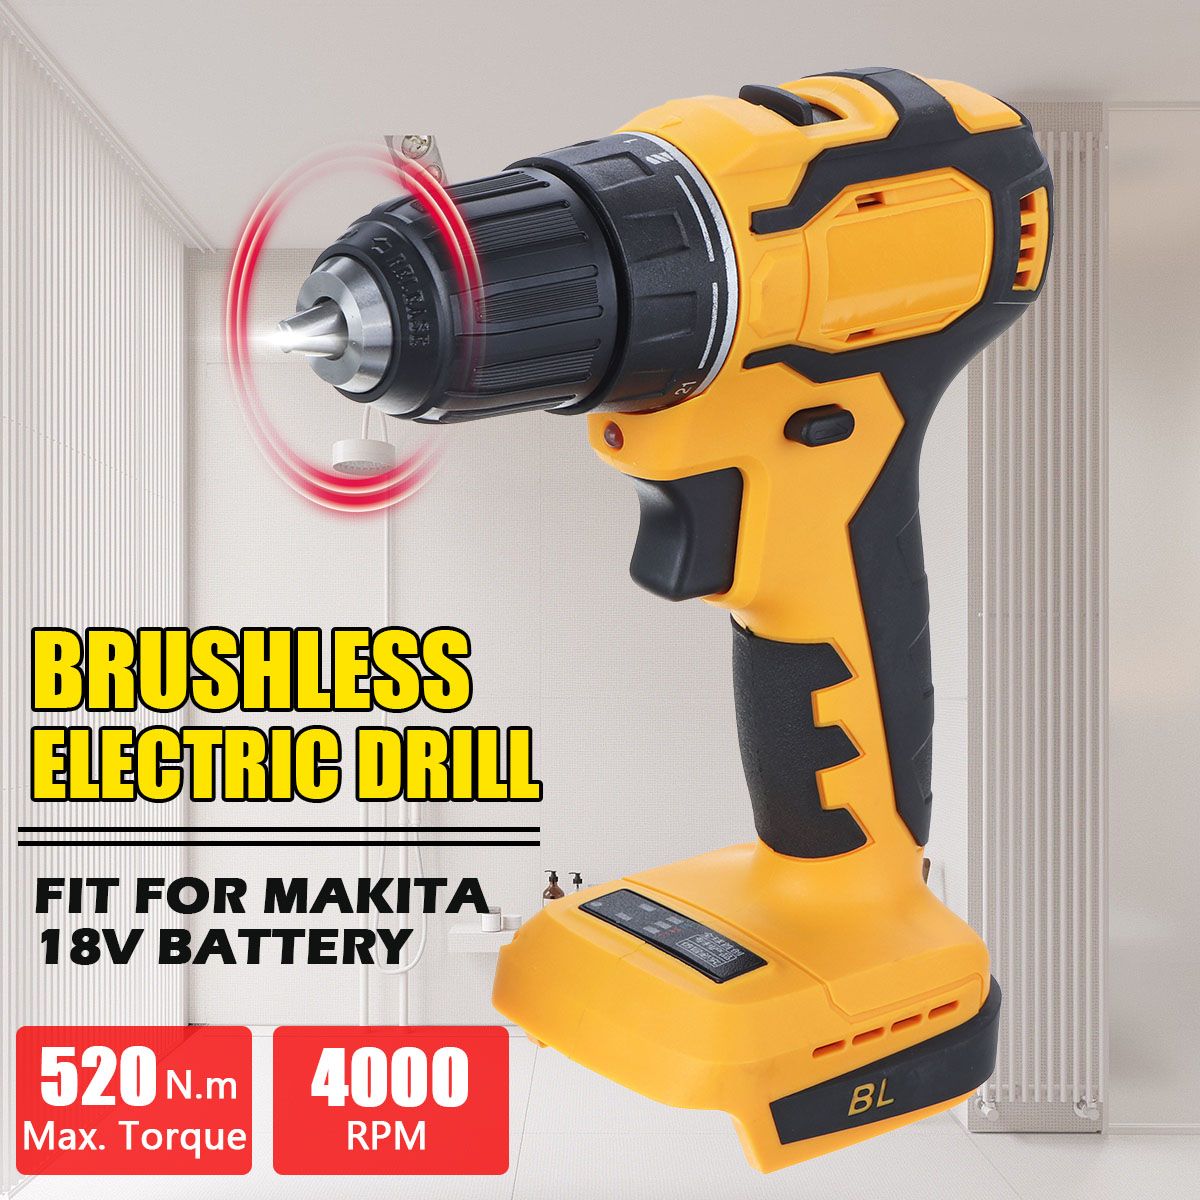 10mm-Chuck-Brushless-Impact-Drill-350Nm-Cordless-Electric-Drill-For-Makita-18V-Battery-4000RPM-LED-L-1642845